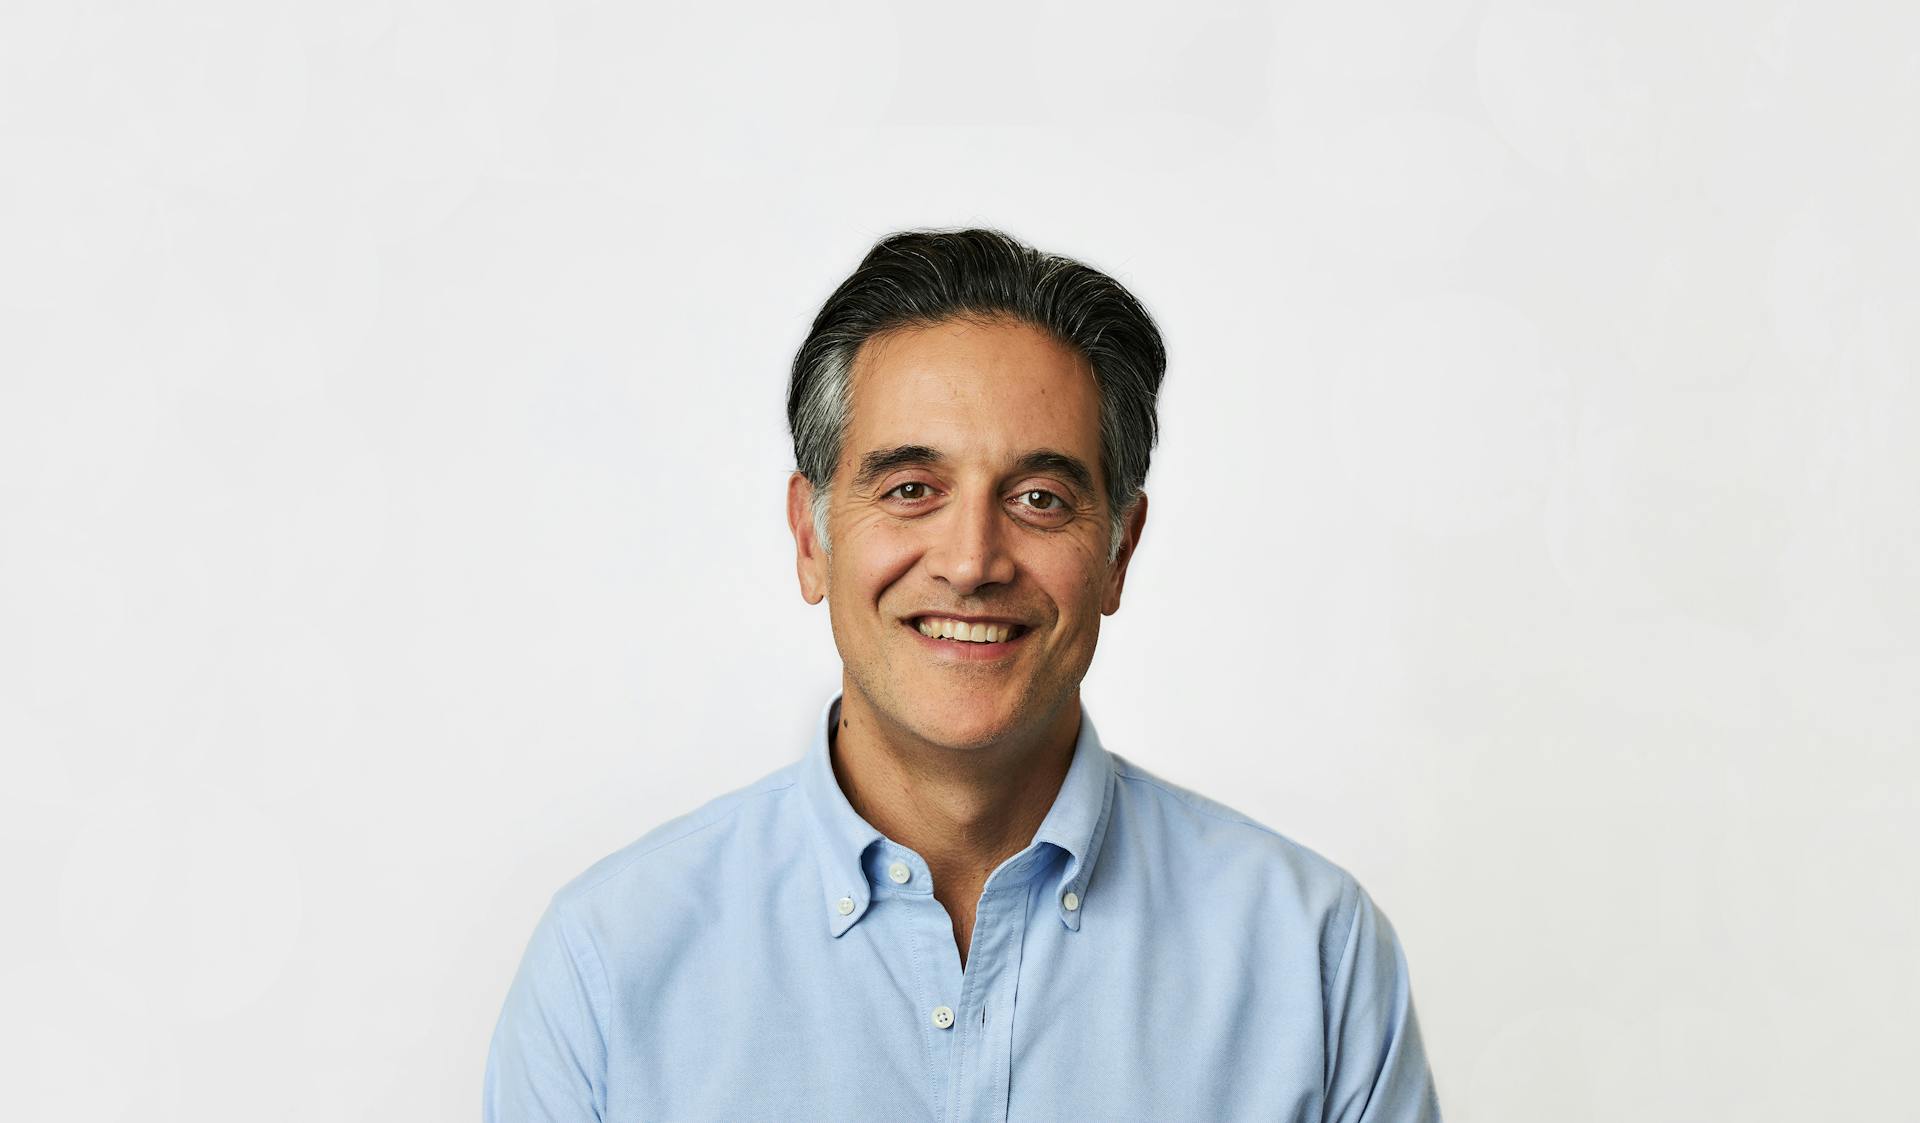 Image of Dr. B CEO, Cyrus Massoumi, smiling in a blue shirt